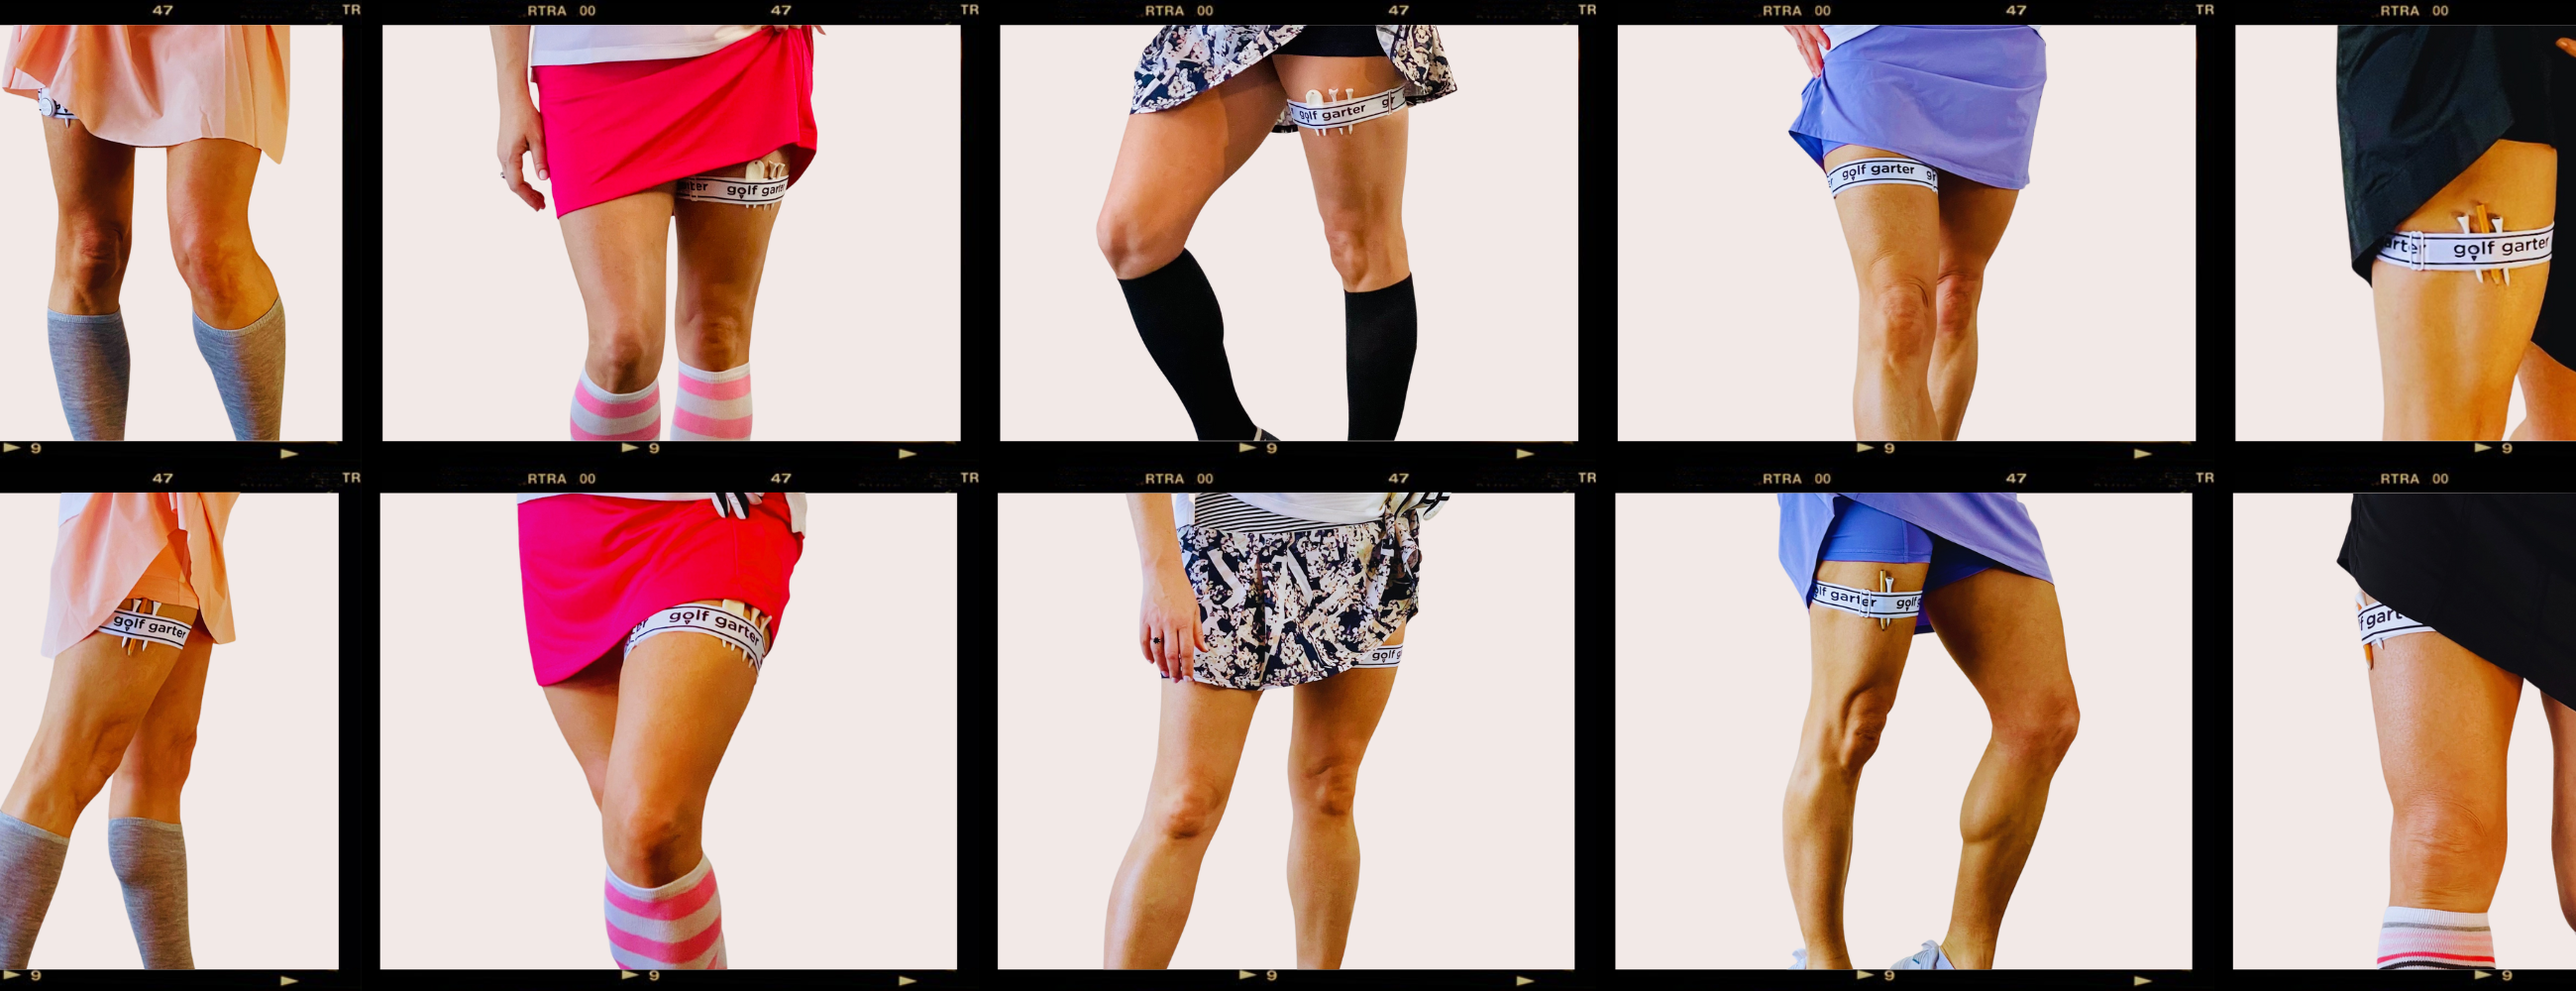 This is a banner image. There are 10 photographs in a grid. Each one shows a women wearing a golf skirt showing a golf garter underneath. Each one is a different skirt and different pose.